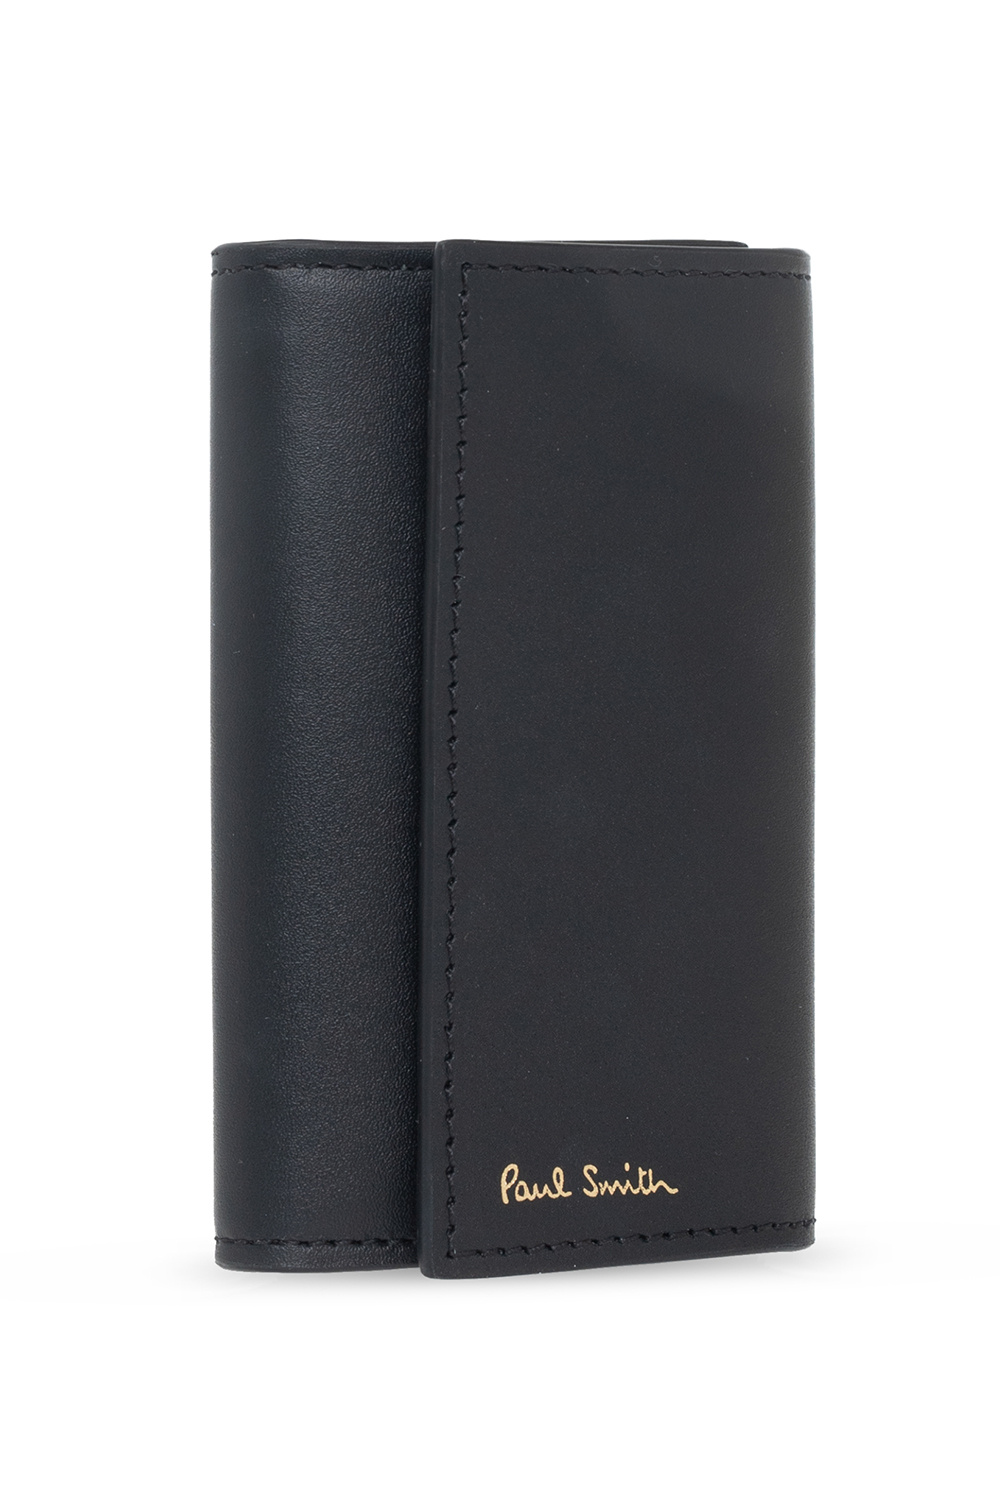 Paul Smith Download the updated version of the app